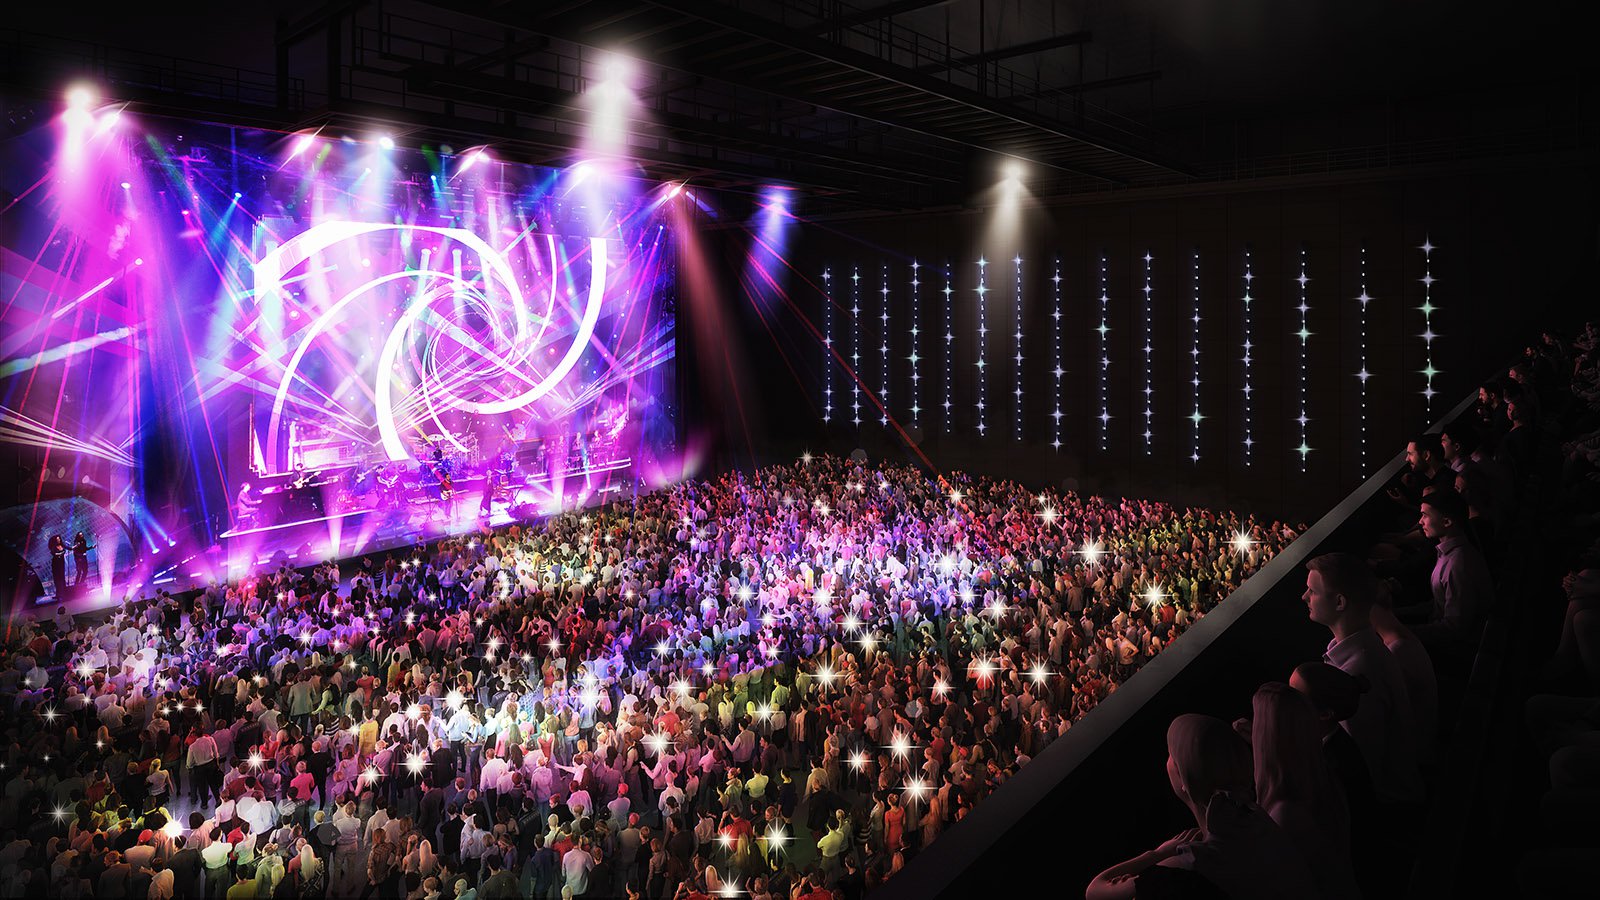 Rotterdam Ahoy will generate energy with dancing people and the